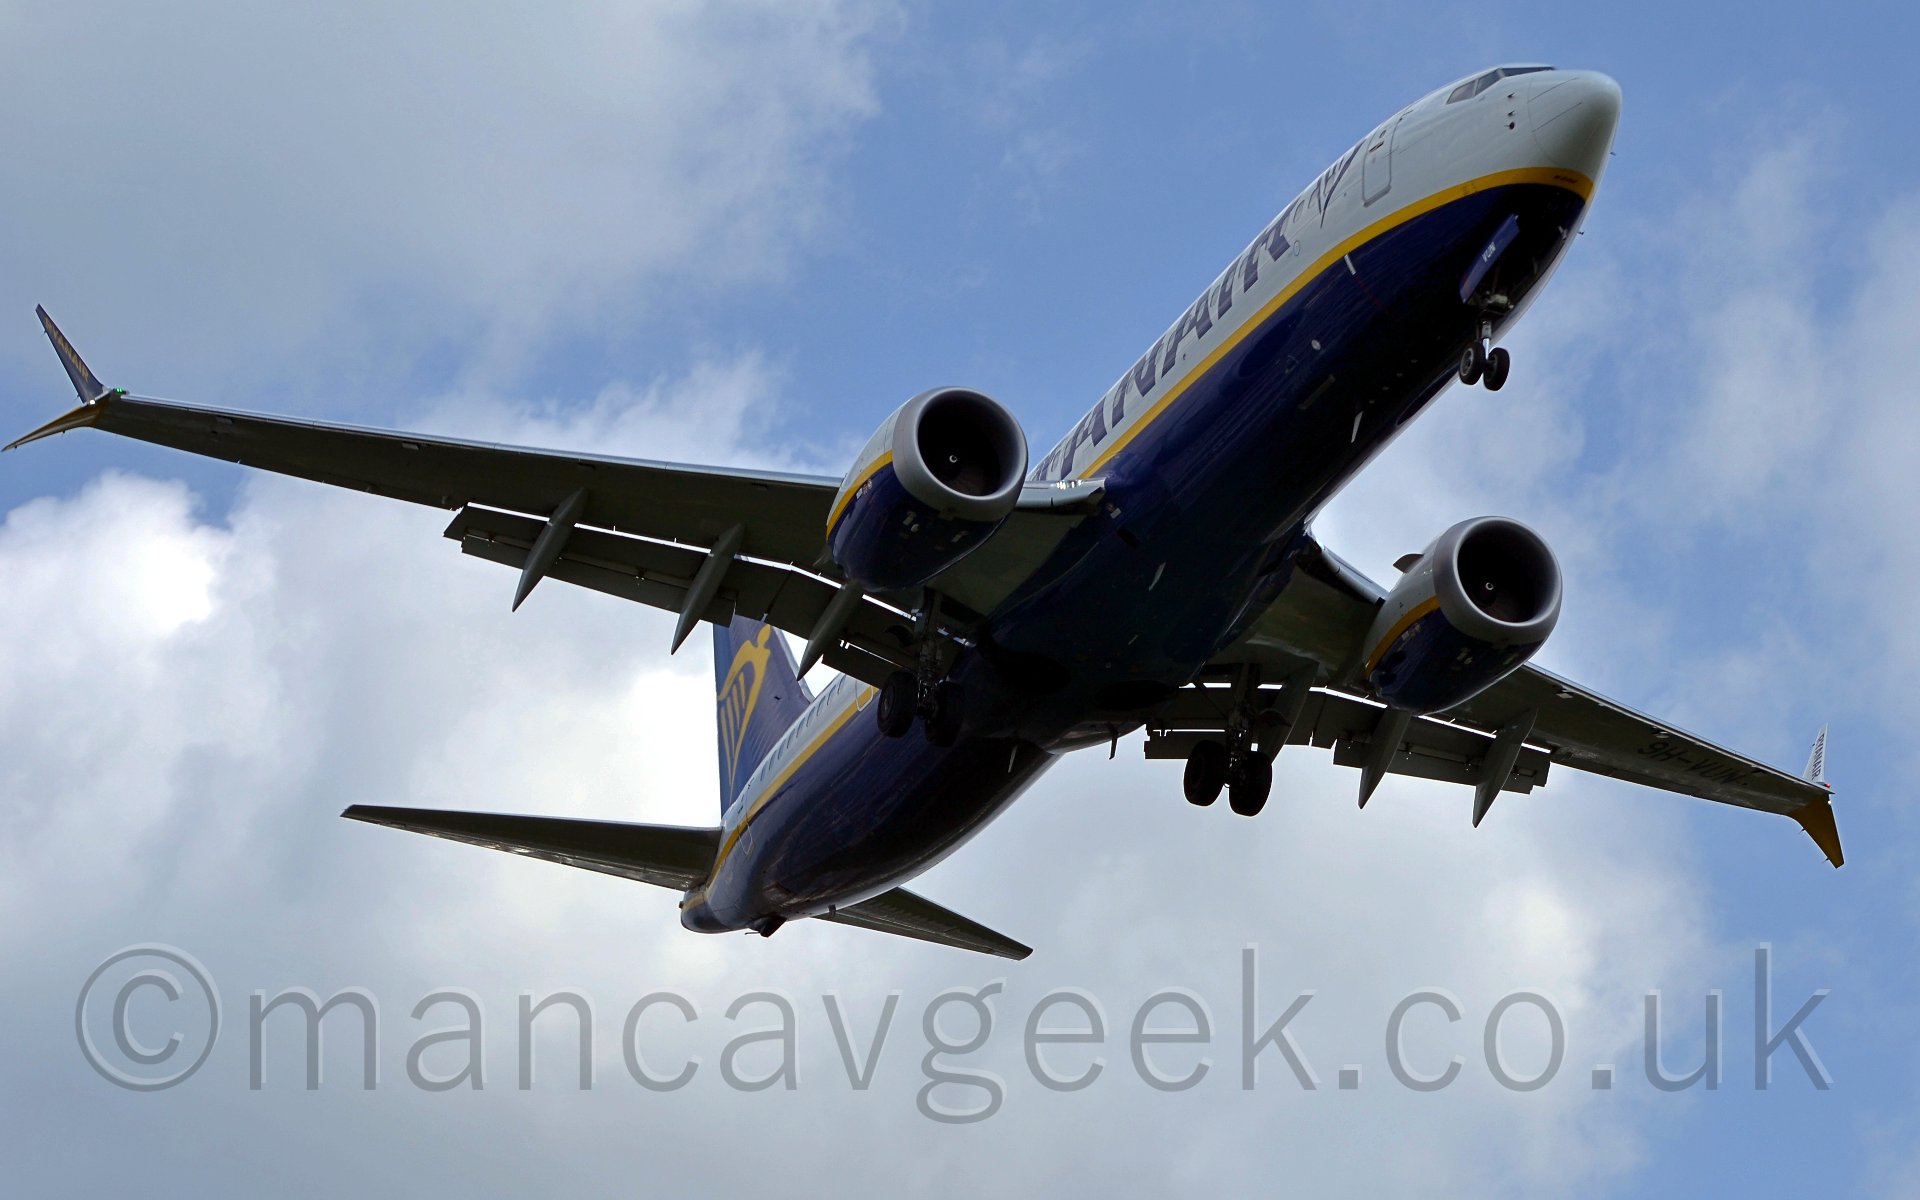 Low side view of a twin engined jet airliner flying from left to right at a very low level, with undercarriage lowered and flaps deployed from behind the wings. The plane has a dark blue belly with white upper section, seperated by a yellow stripe, with the same basic colour scheme on the engines. There are large "Ryanair" titles on the upper forward fuselage. The tail is dark blue, with a yellow winged Irish harp. The wingtips are split, a blue section heading upwards at around 30 degrees, while a yellow portion points about 30 degrees down. Behind the plane, the sky is a mix of piercing blue, and fluffy white.